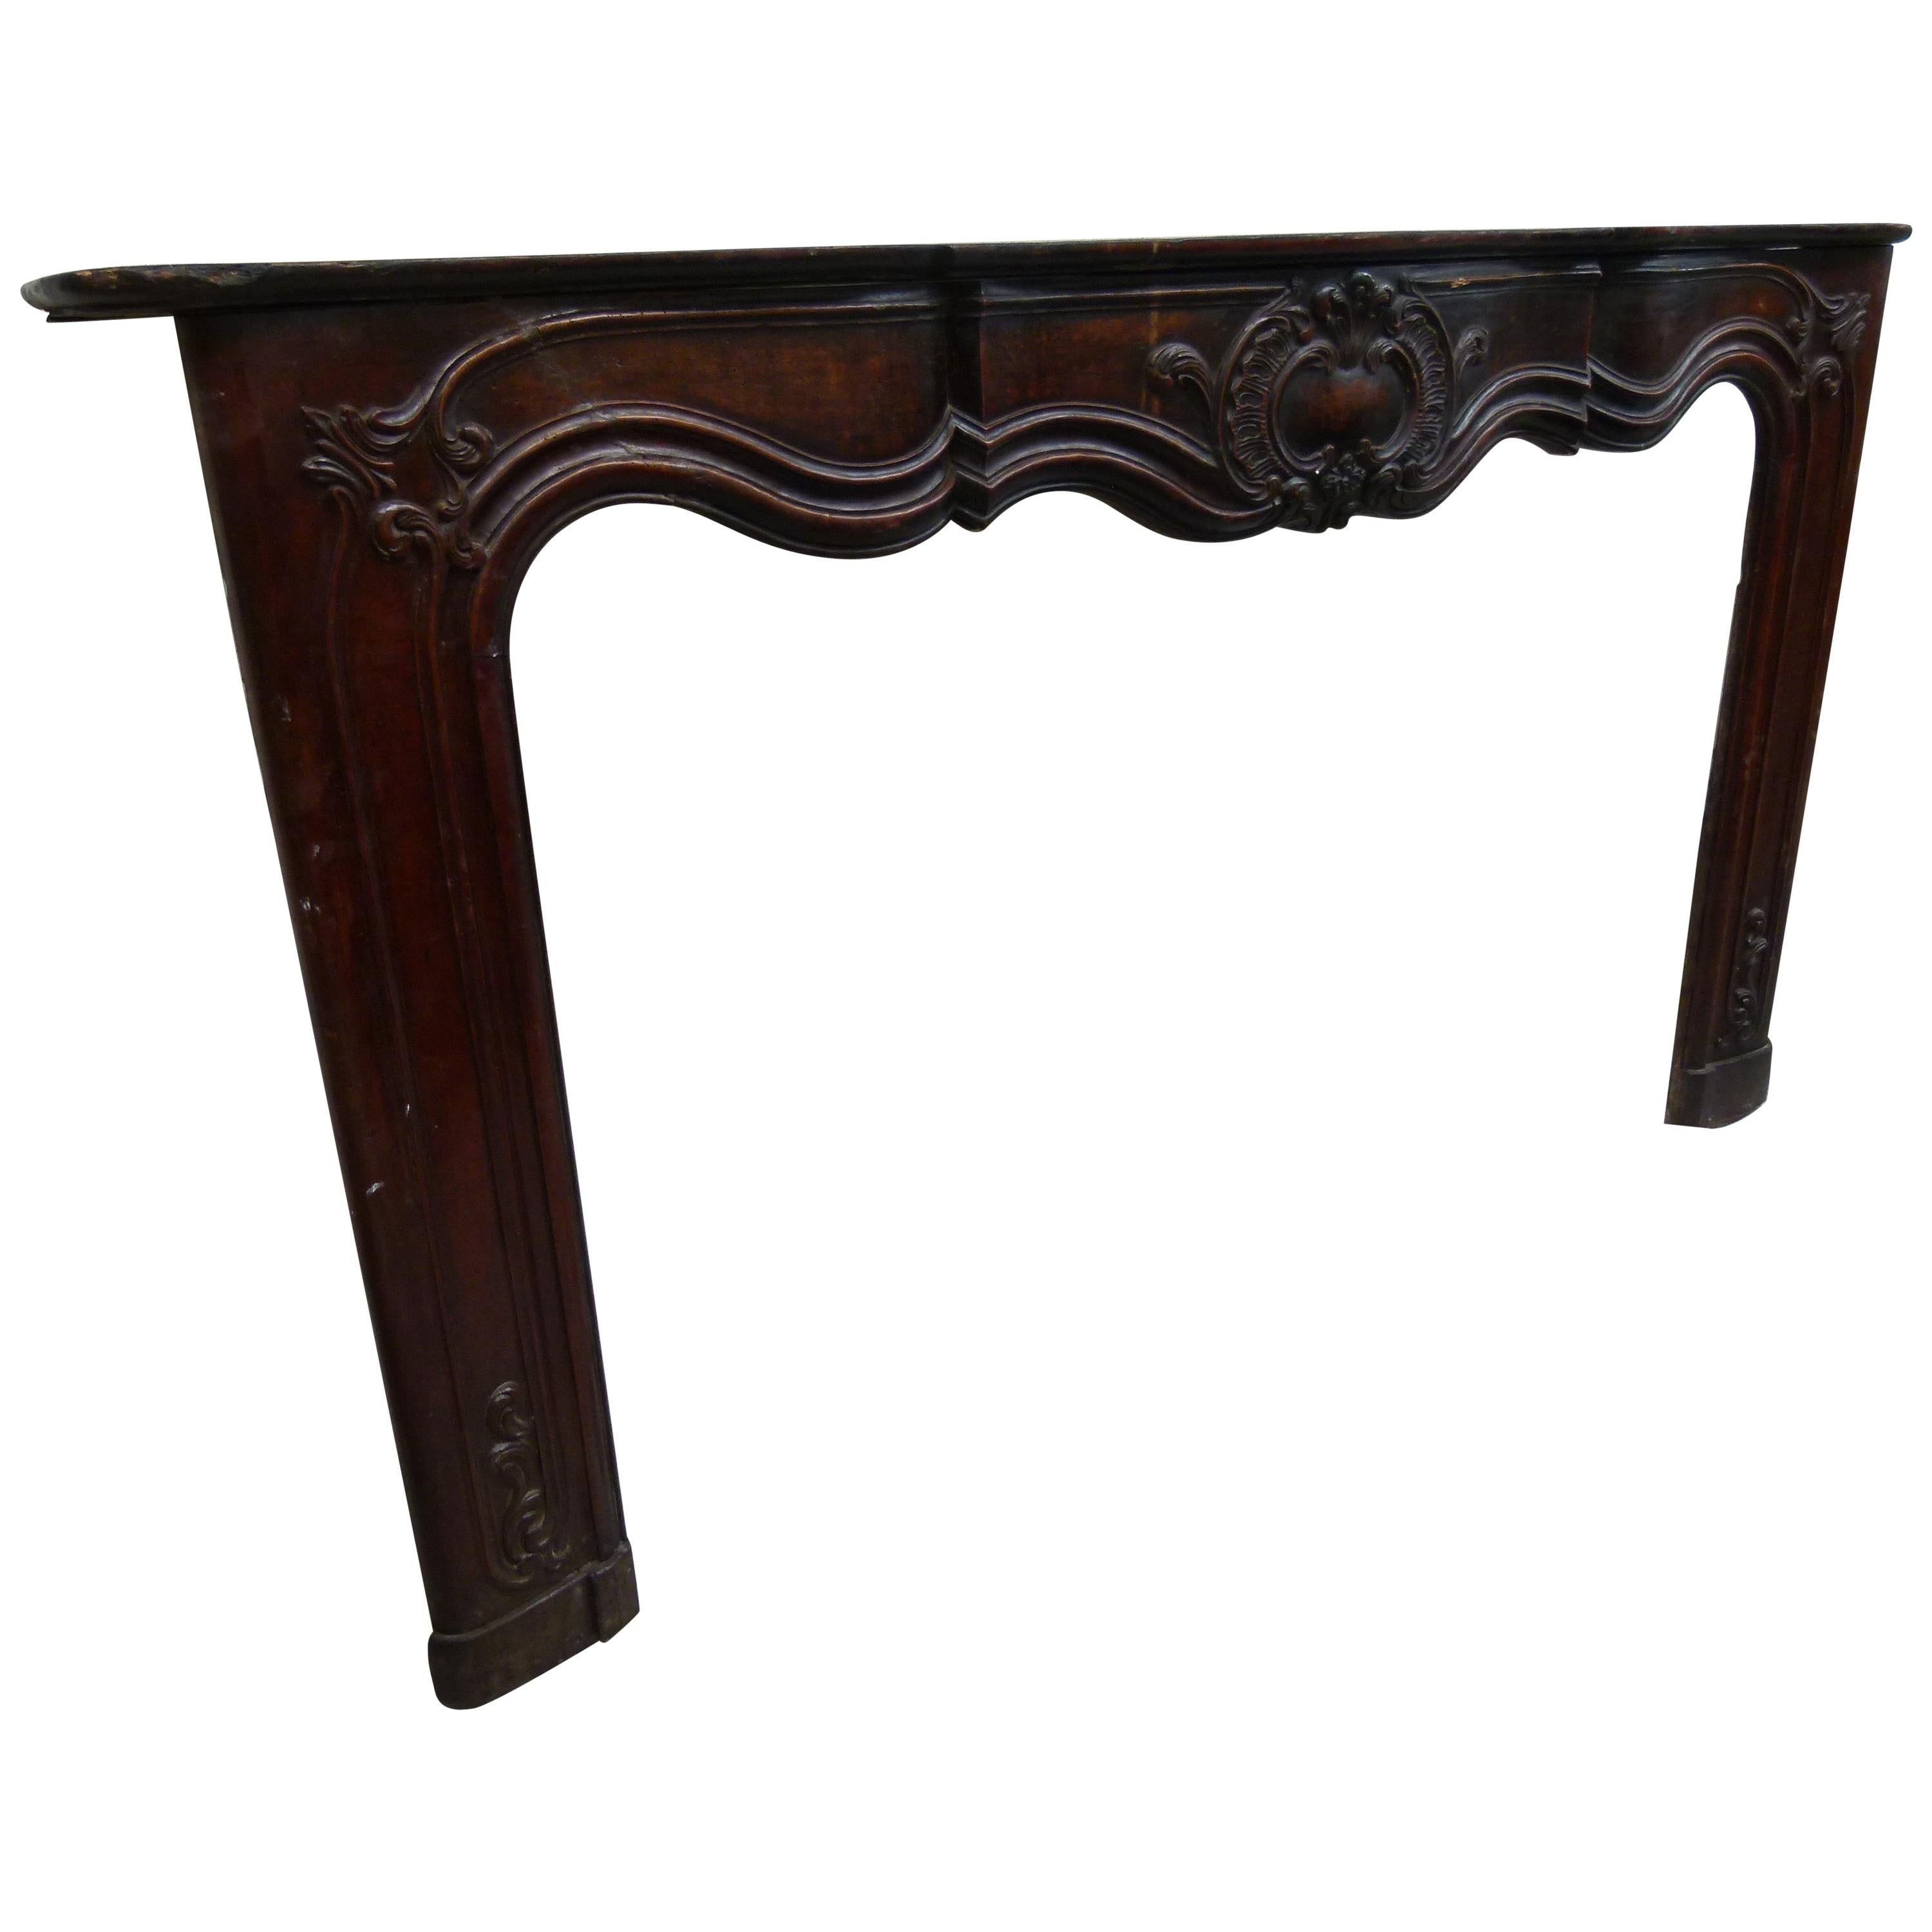 Louis XVI Style Wooden Carved Fireplace Mantel